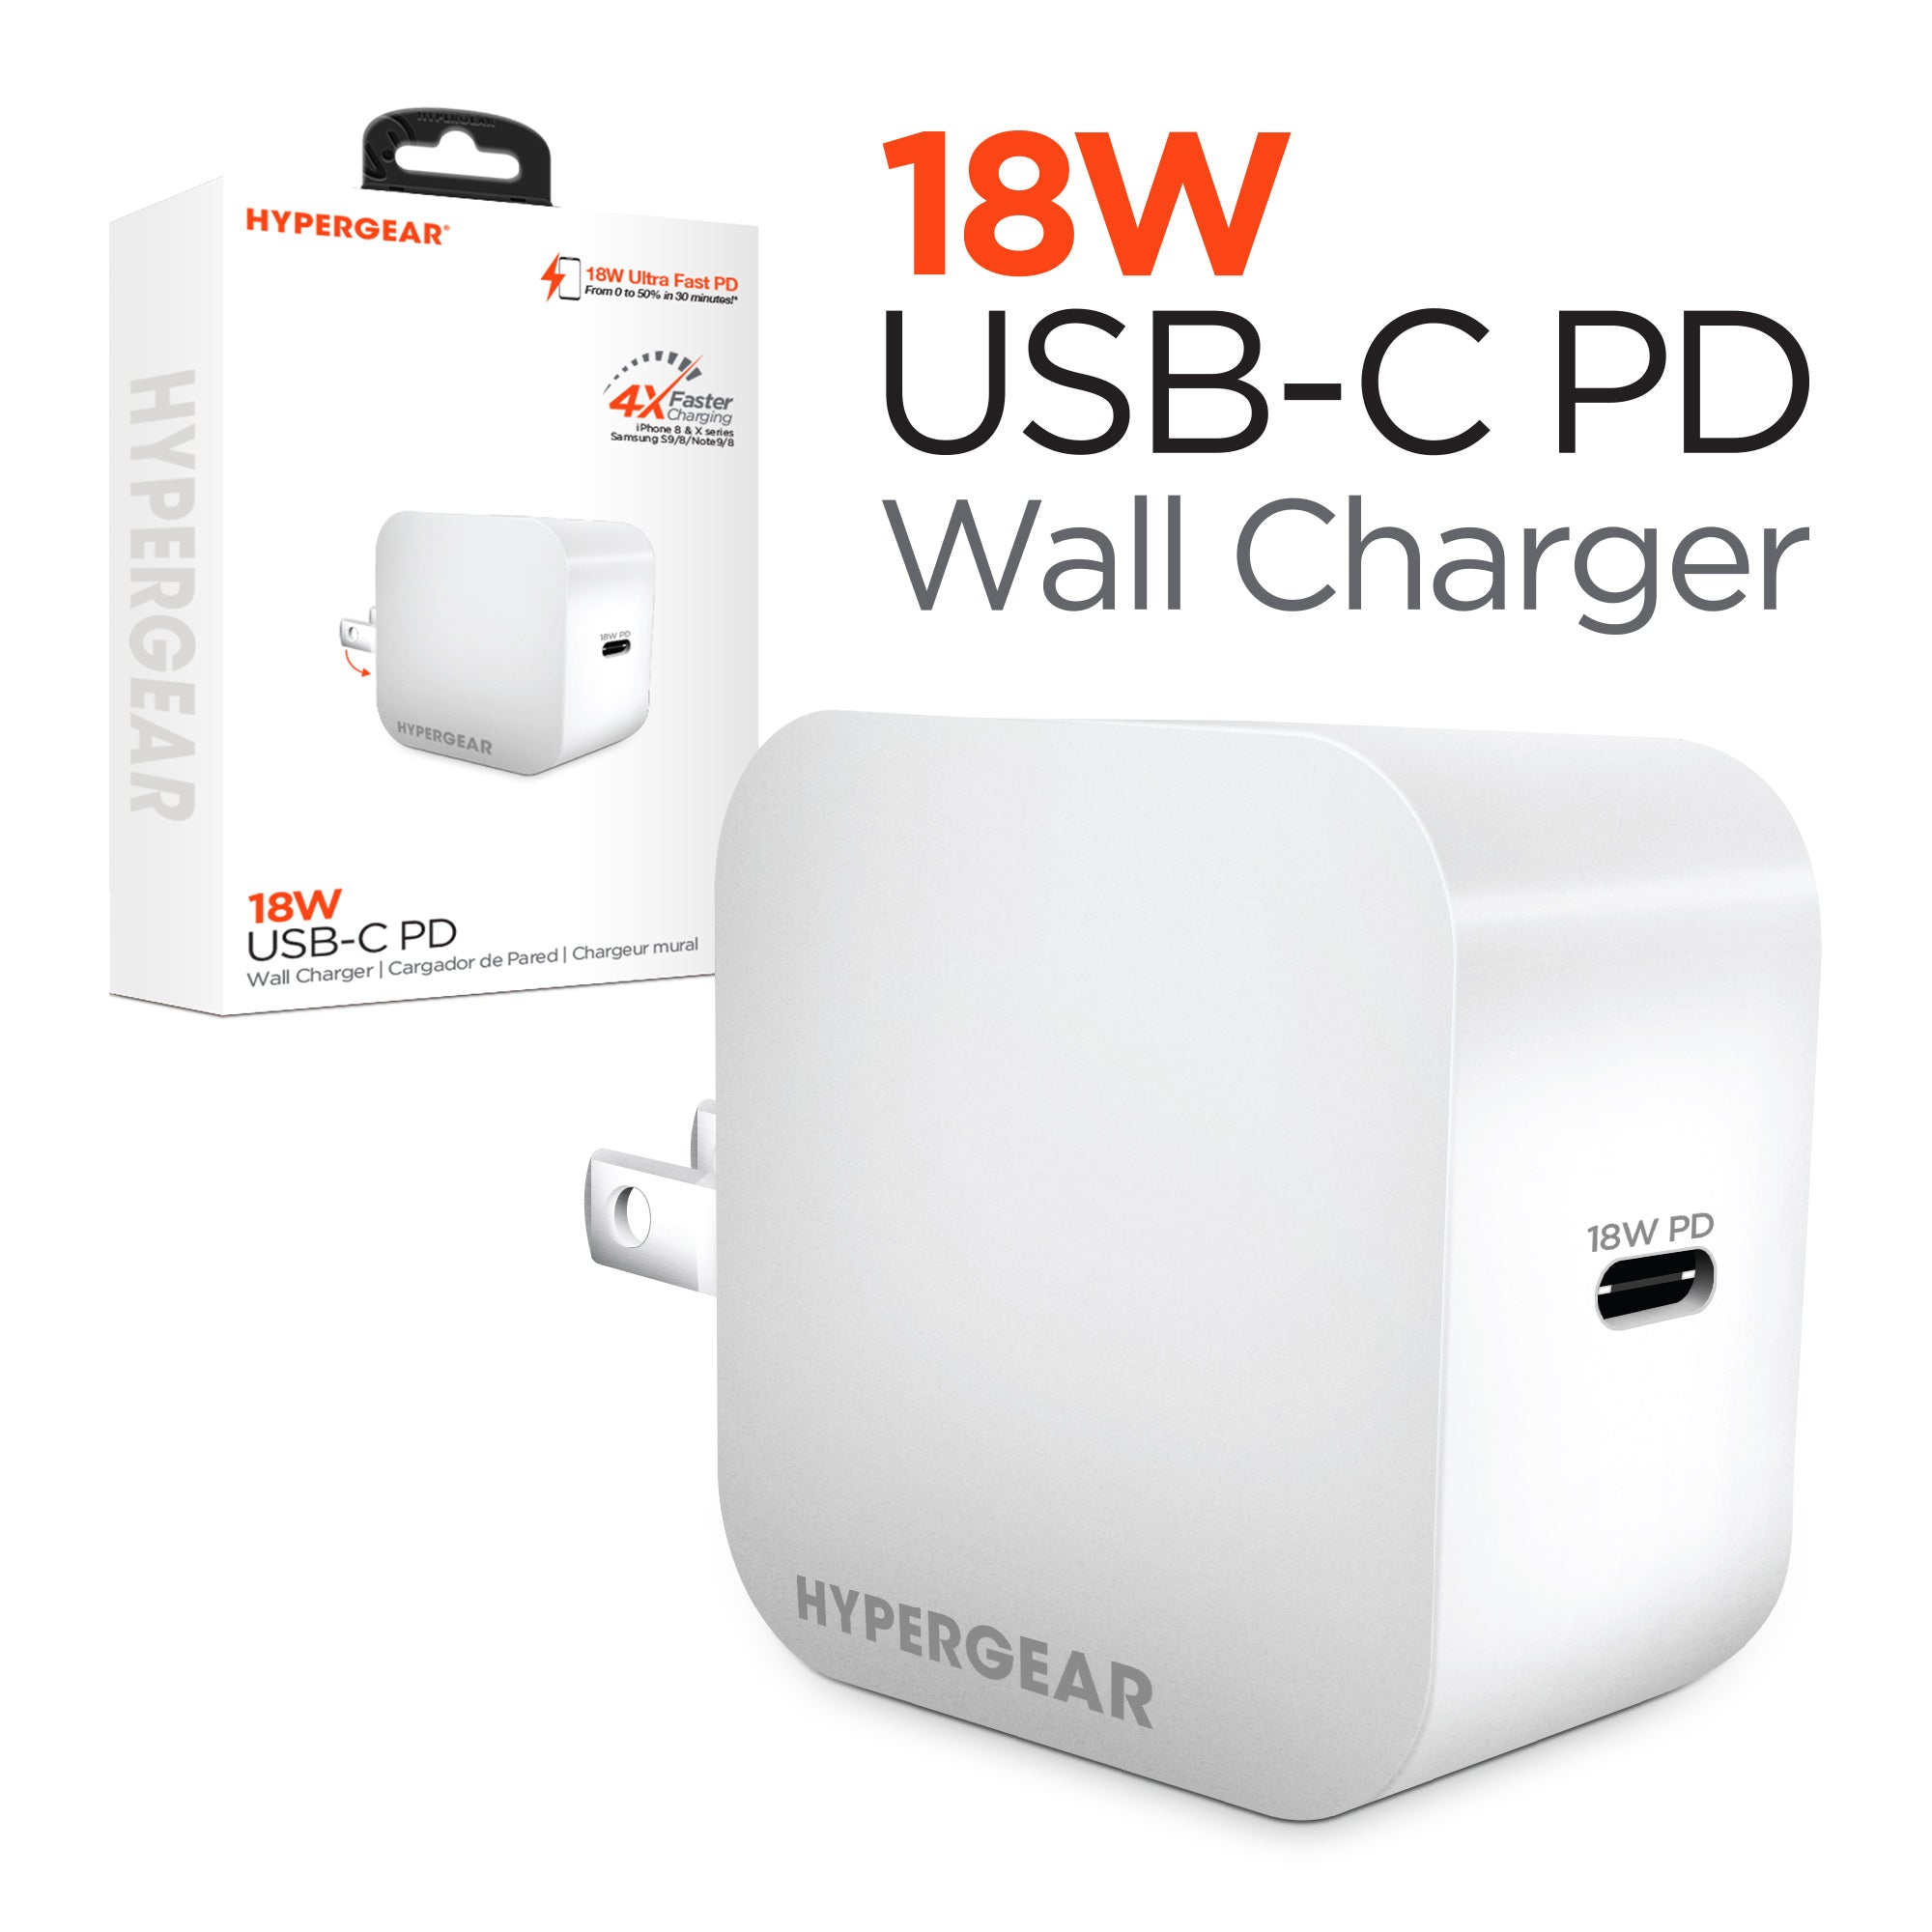 18W USB-C Power Delivery Super Speed Wall Charger